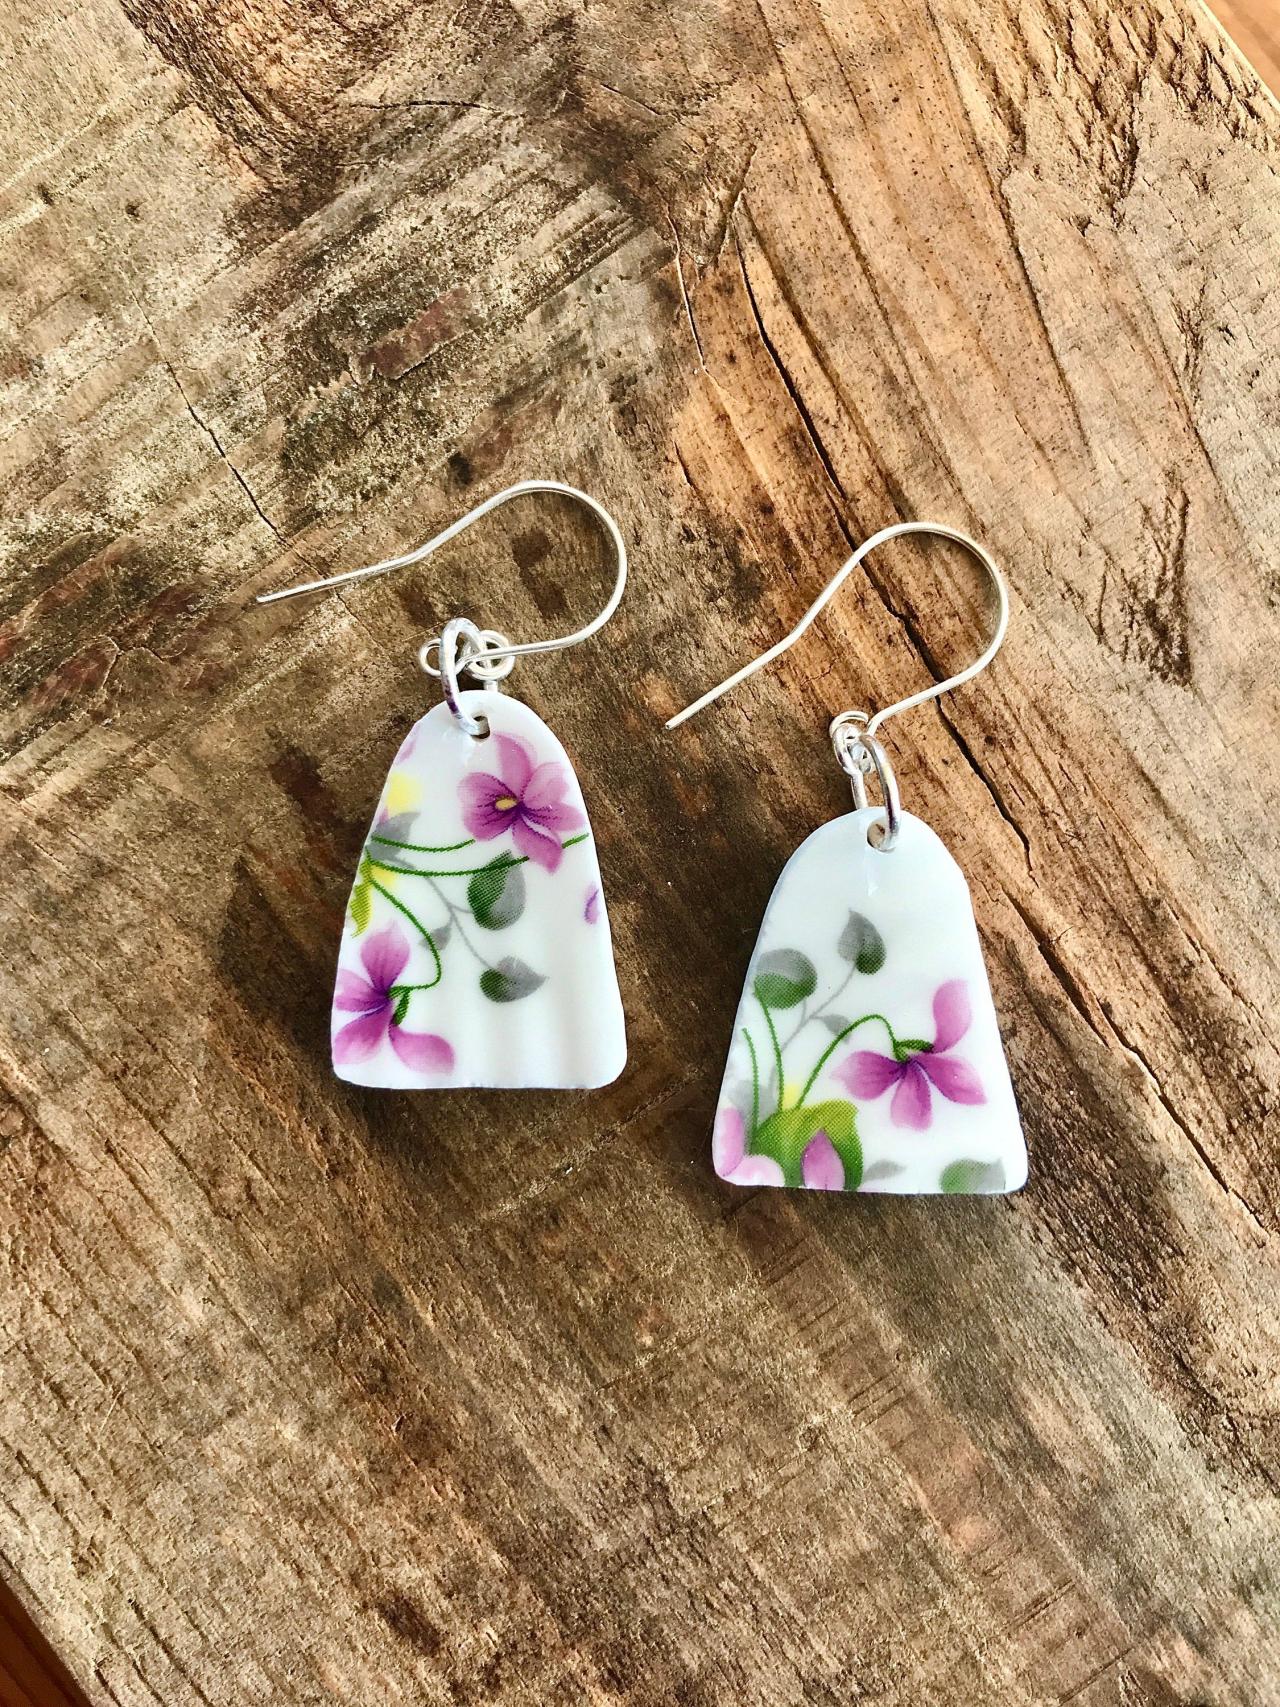 Gorgeous Purple Floral Vintage Recycled Broken China Earrings With Sterling Silver Wires.